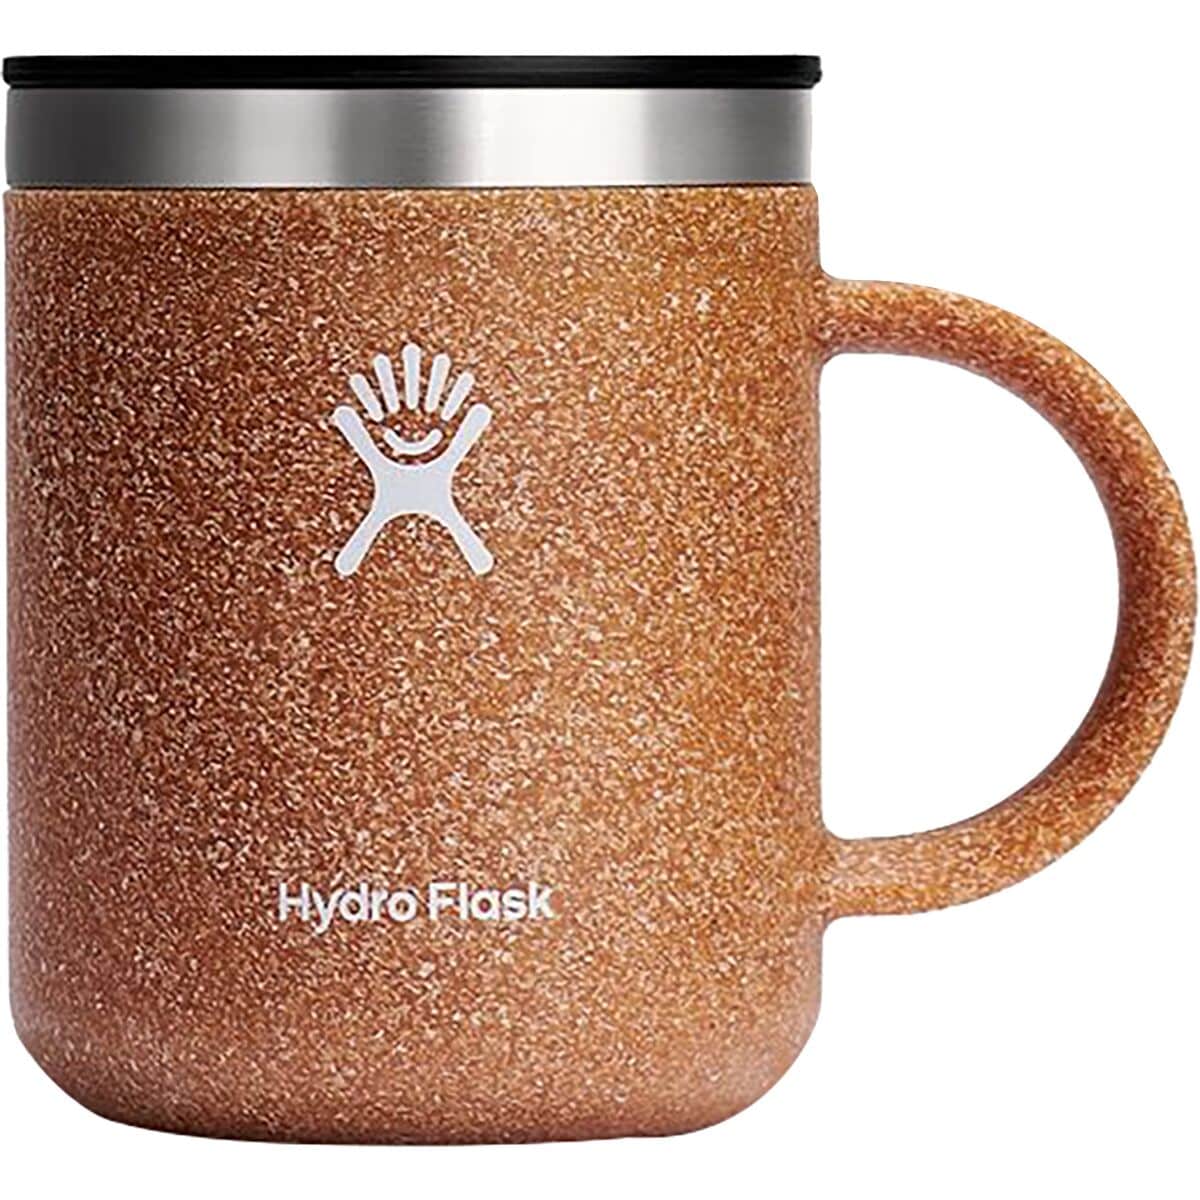  Hydro Flask Press-In Lids Various - Tumbler and Coffee Mug  Accessory Black Small : Sports & Outdoors